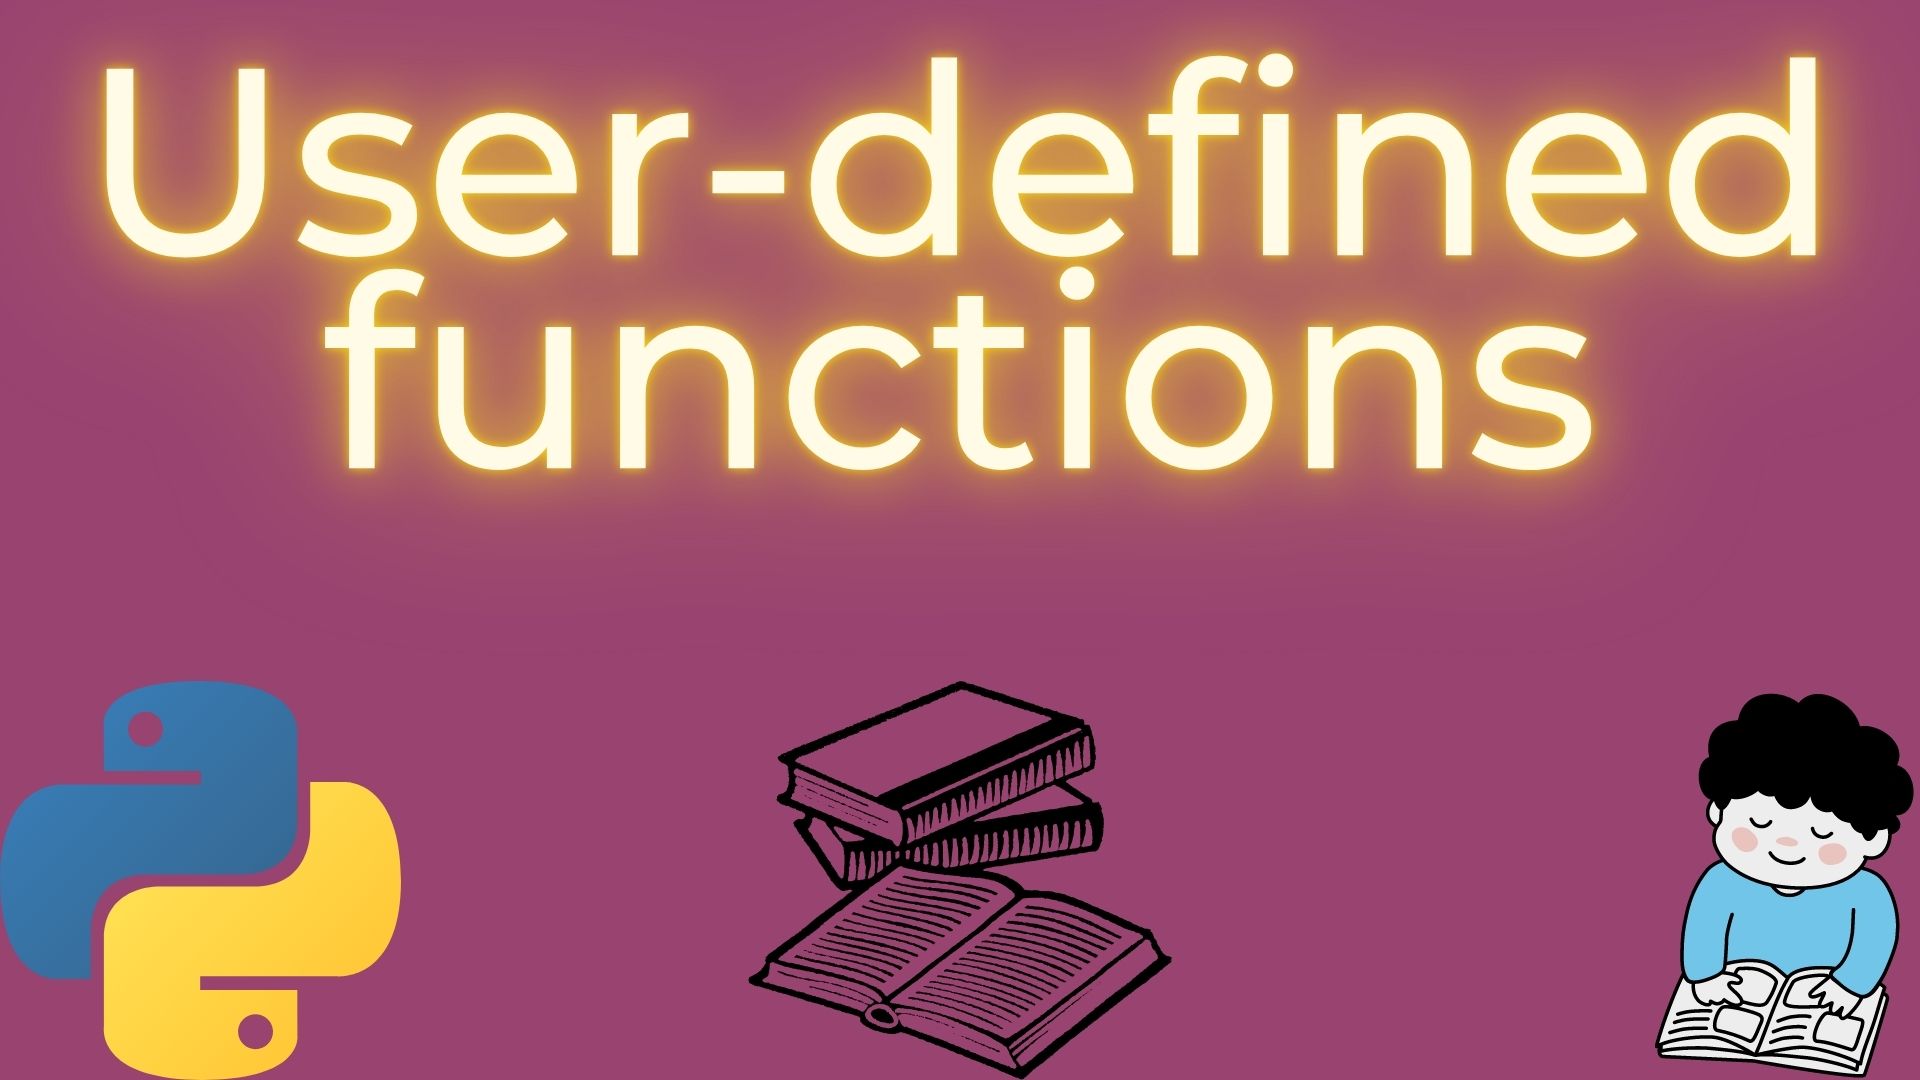 User-defined functions